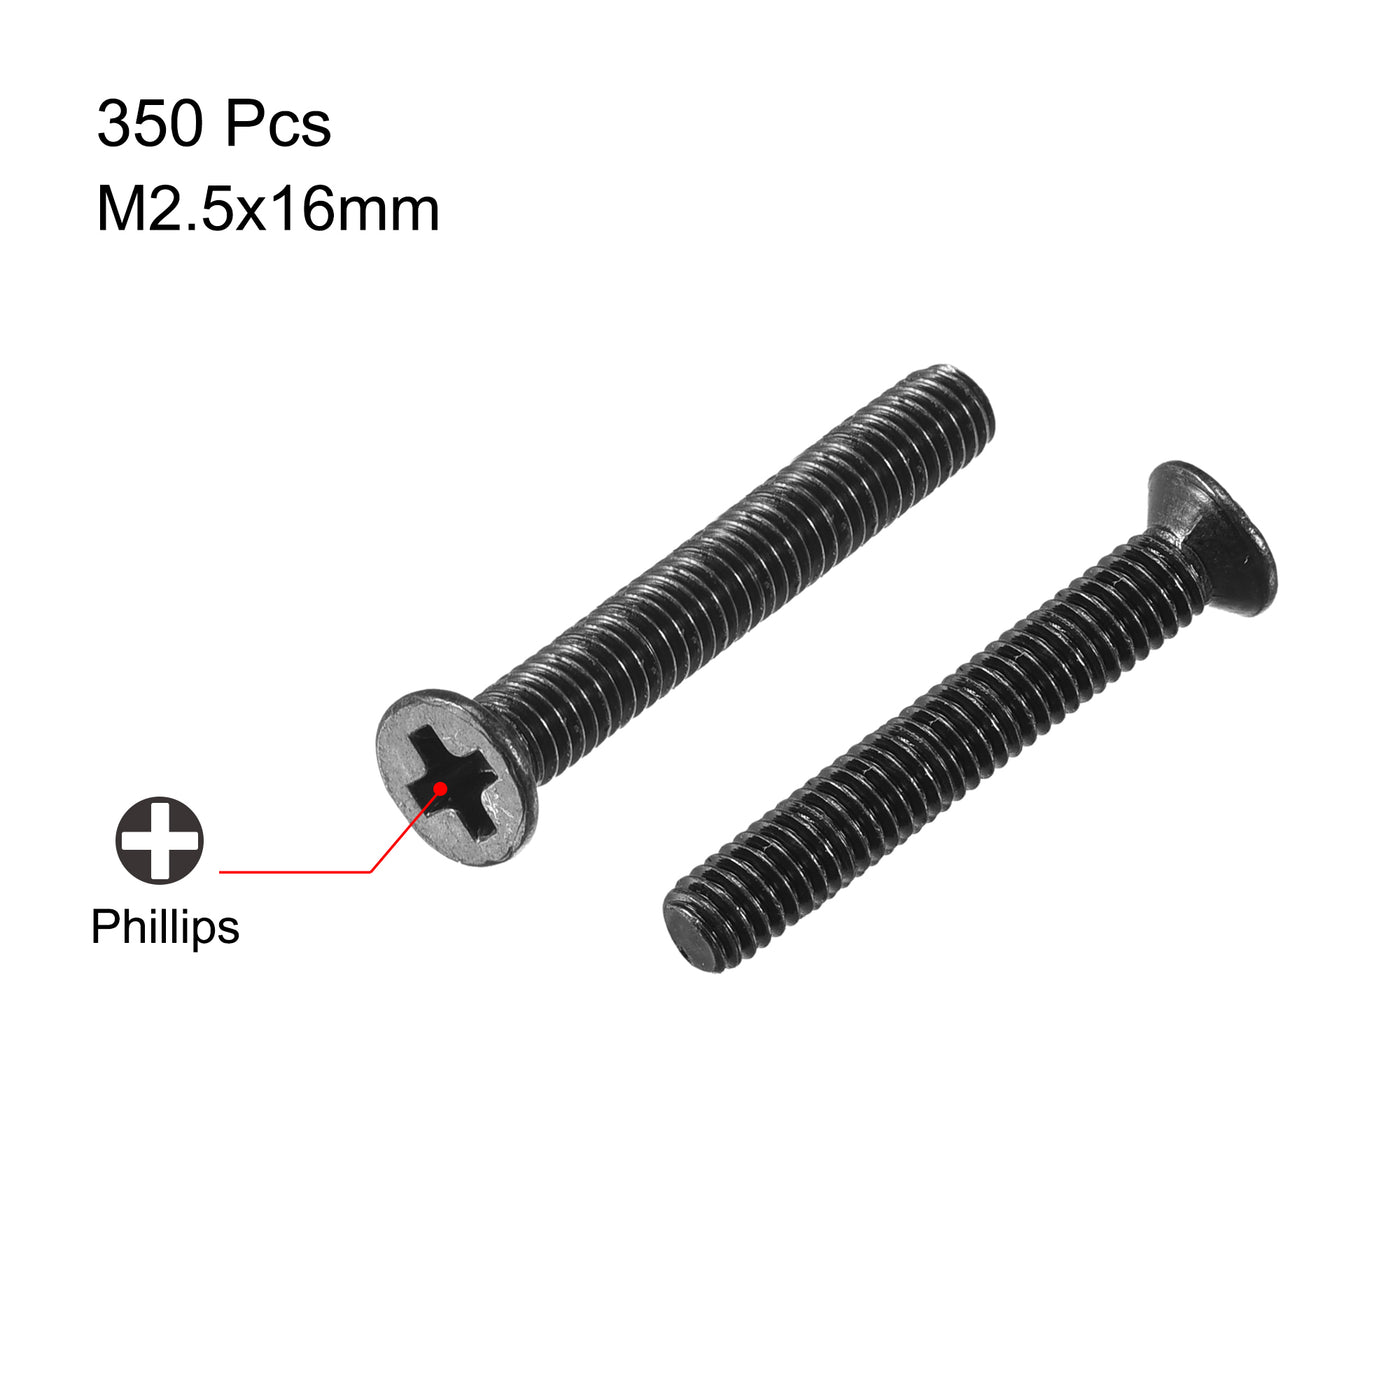 uxcell Uxcell M2.5 x 16mm Phillips Flat Head Screws Carbon Steel Machine Screws Black for Home Office Computer Case Appliance Equipment 350pcs